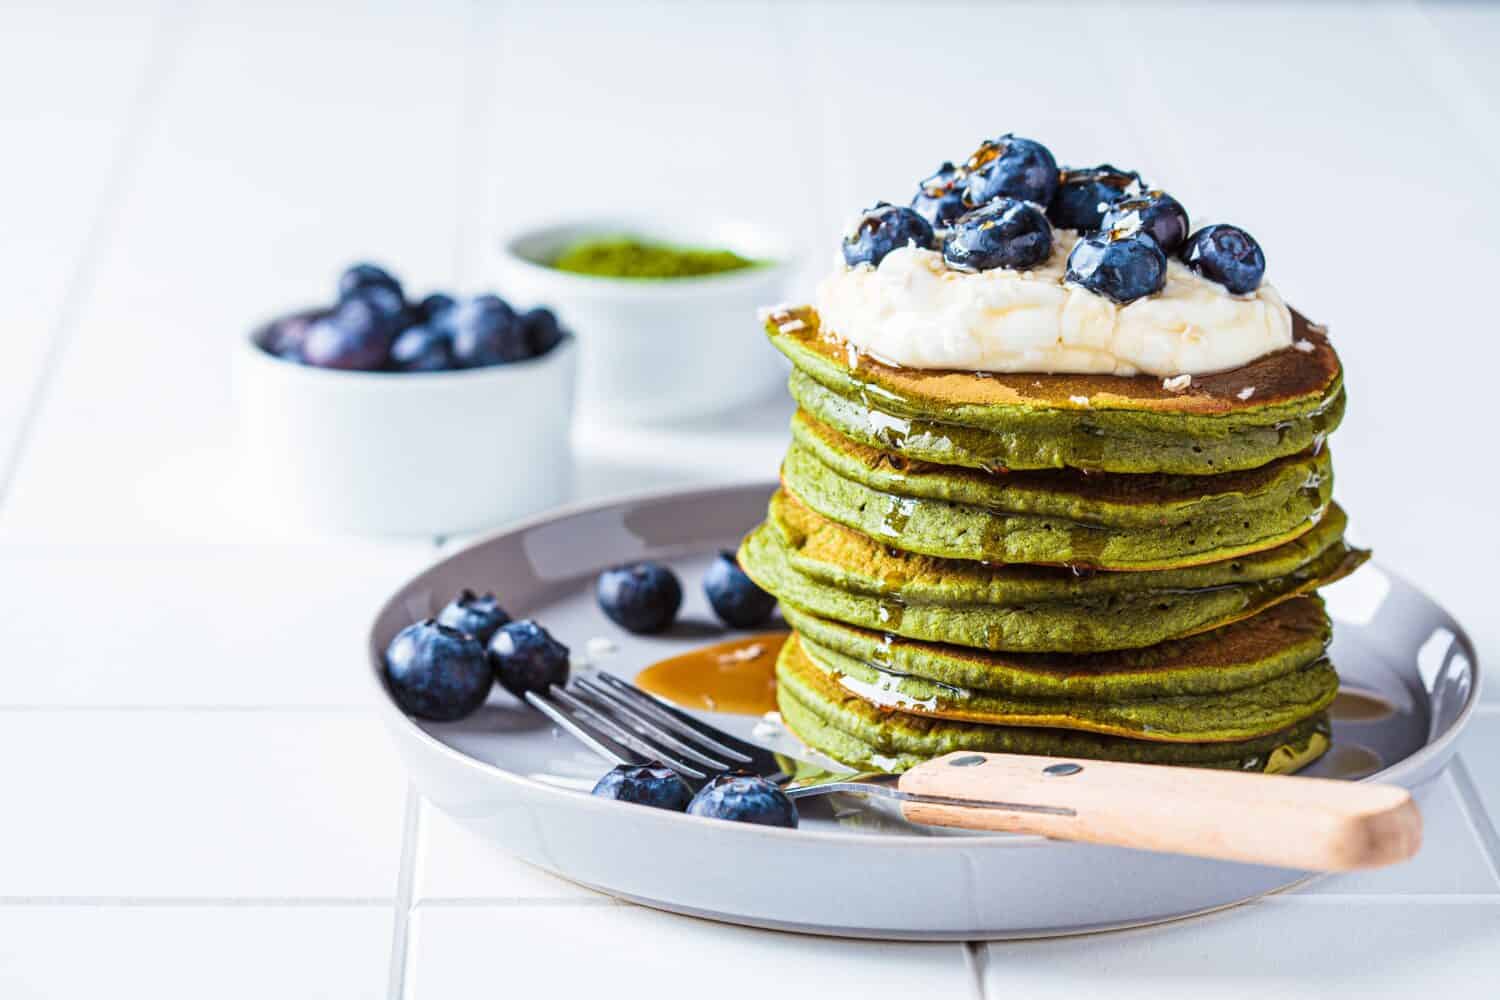 Matcha tea green pancakes with coconut cream, blueberries and maple syrup, white background, copy space. Vegan dessert concept.